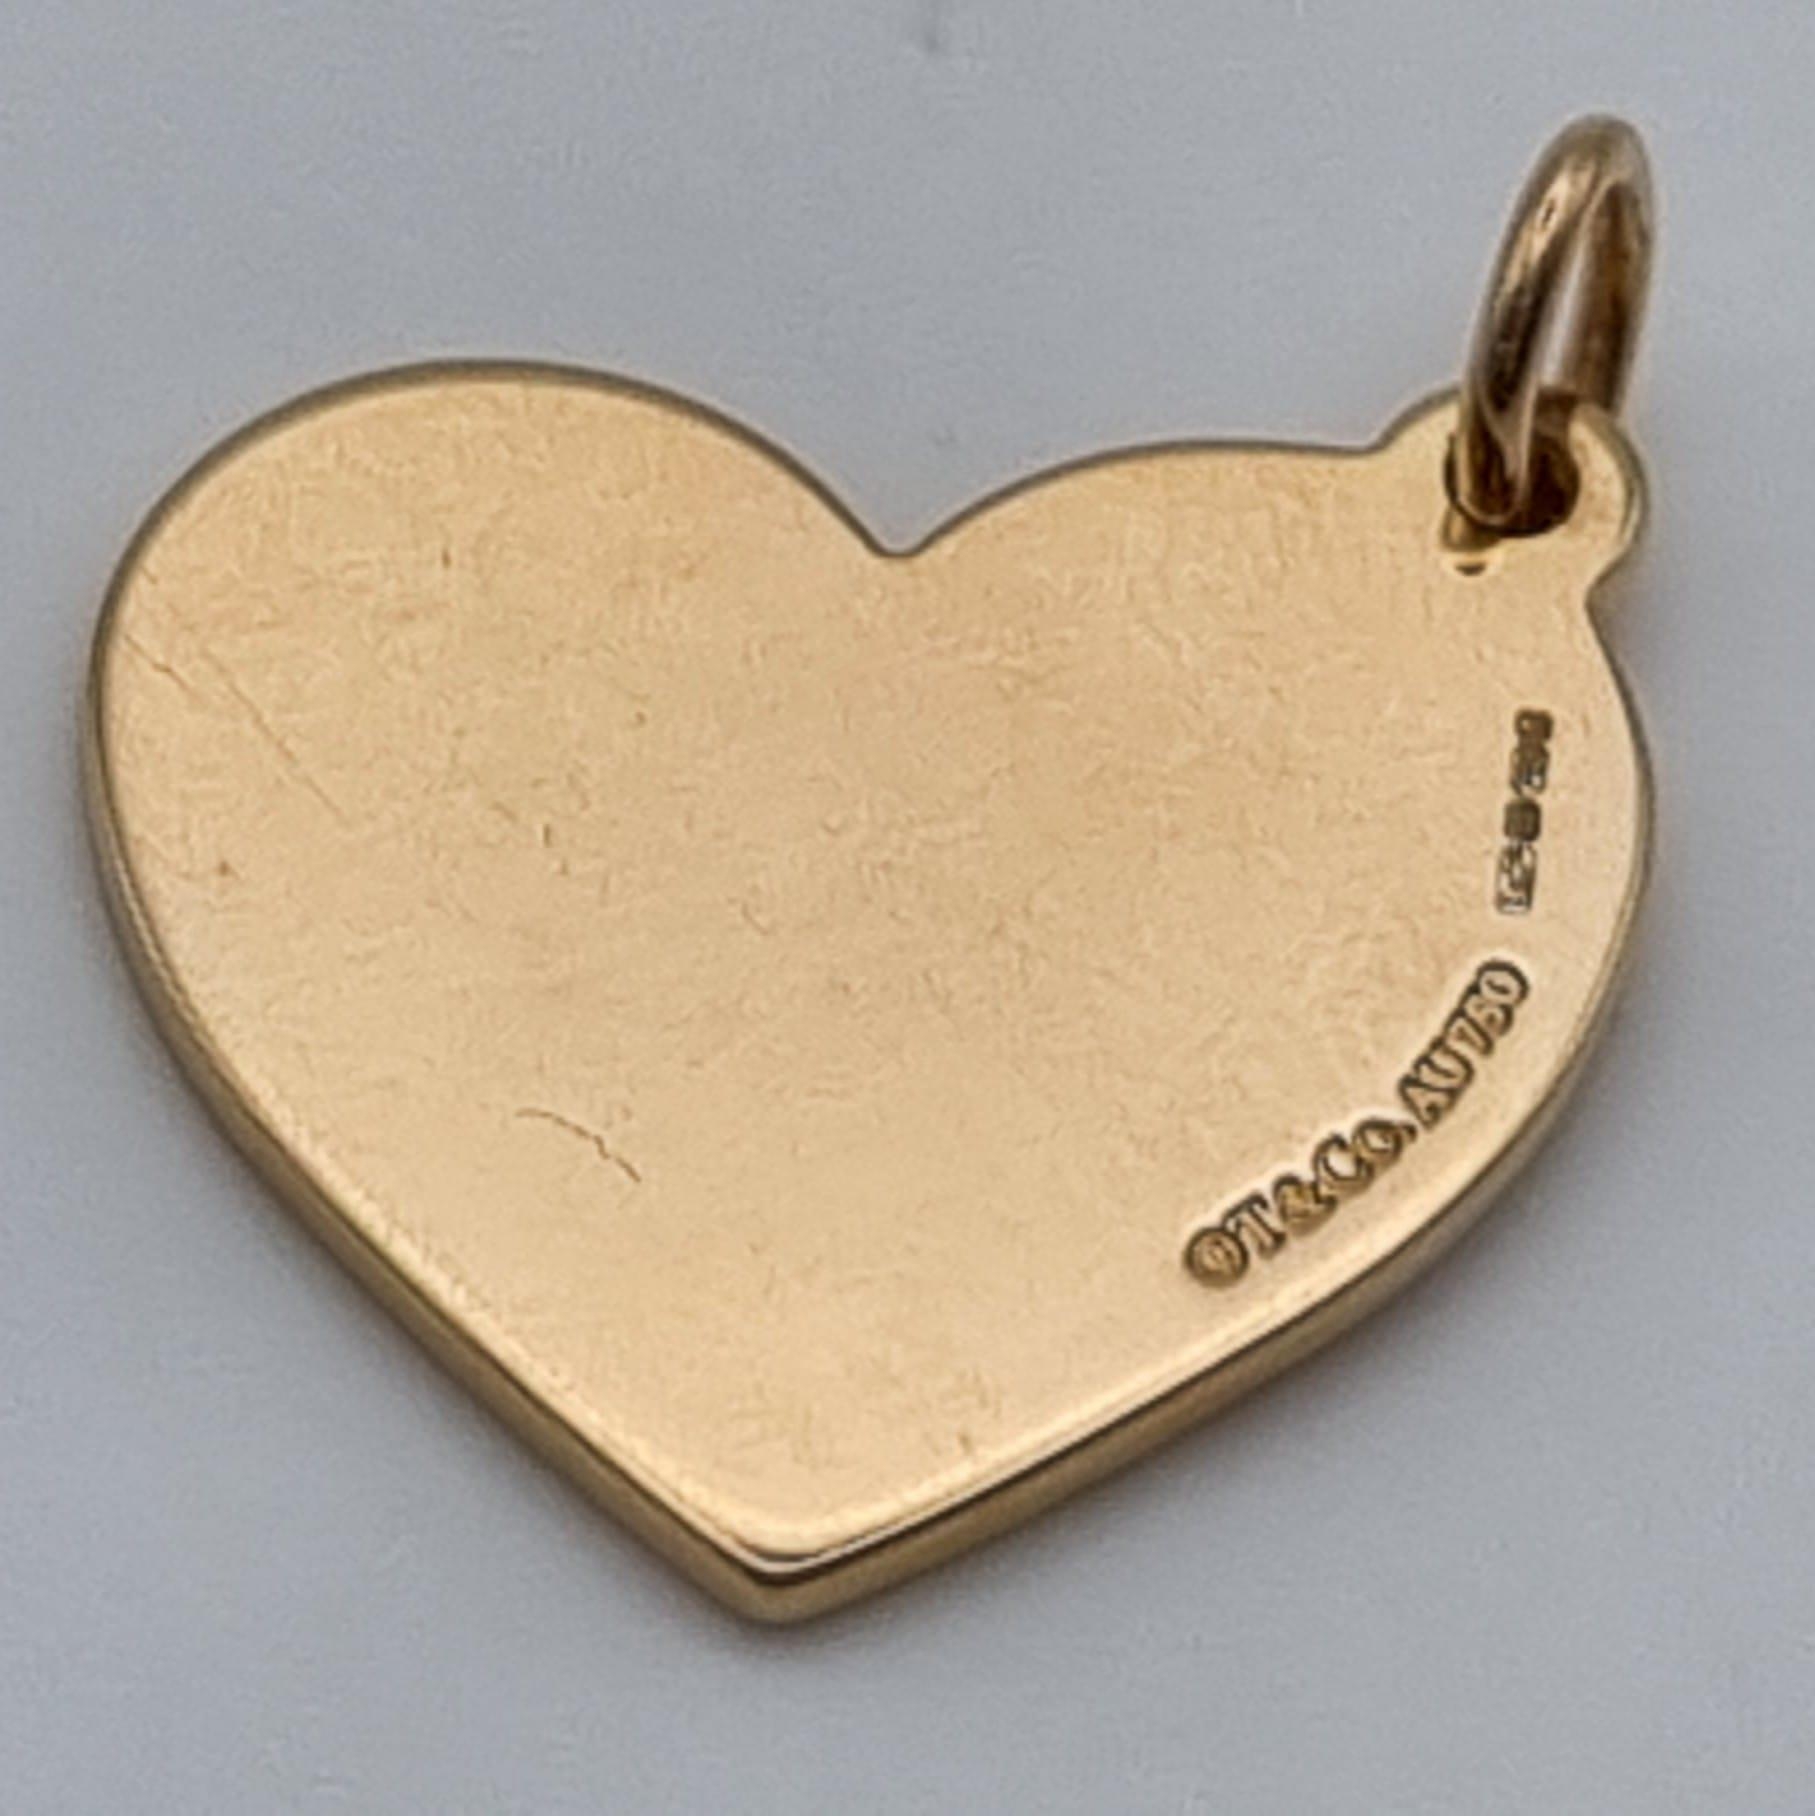 A TIFFANY 18K ROSE GOLD HEART PENDANT WITH ROSE ENGRAVING. 7.8gms - Image 2 of 3